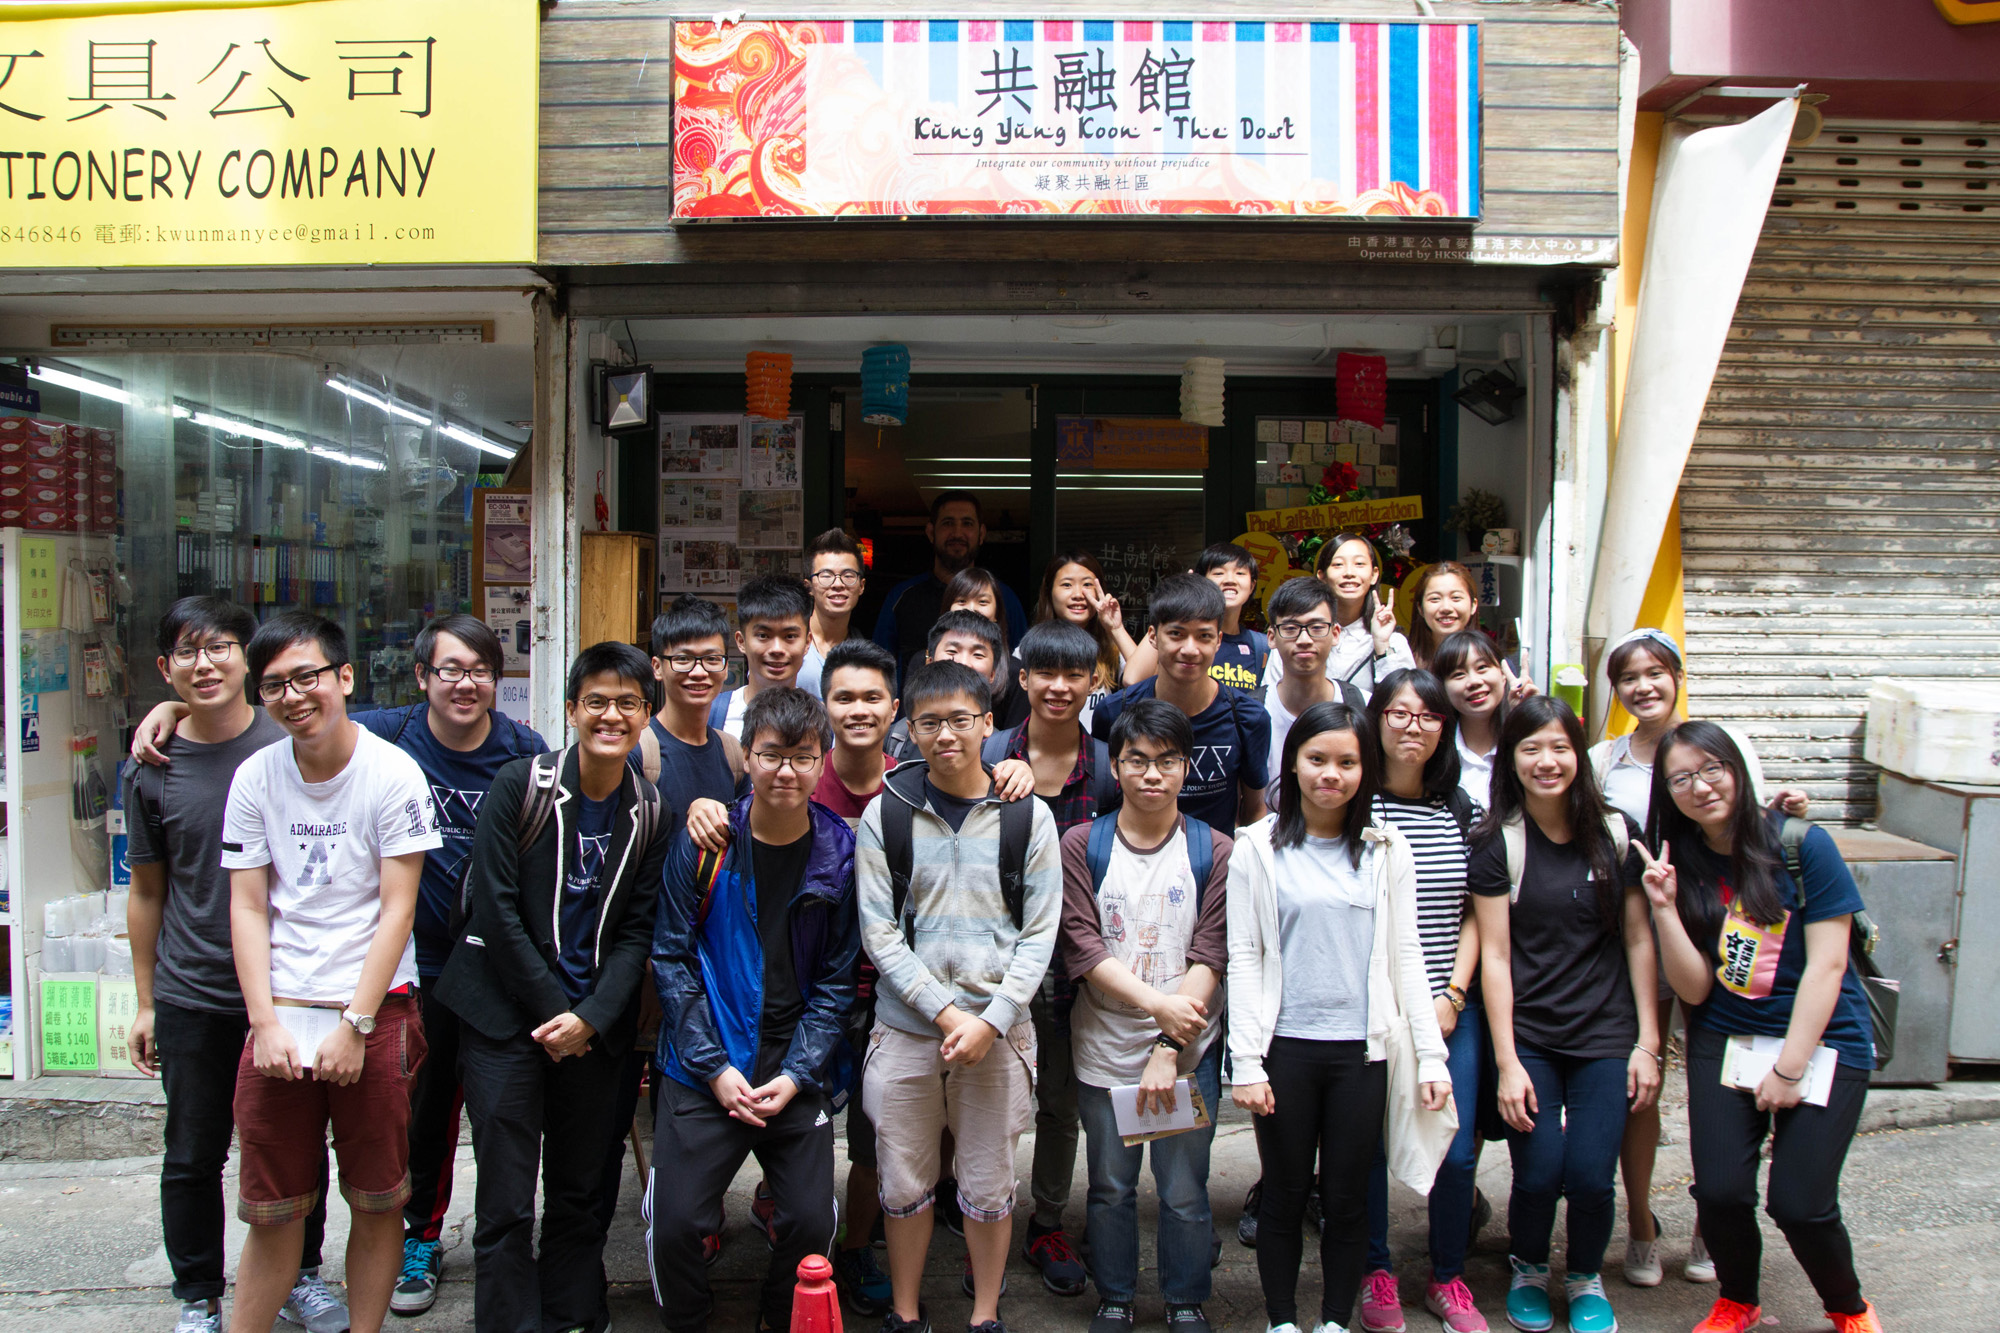 Accompanied by Dr. Francisca Lai (4th from the left), 25 Social and Public Policy Studies students went on tour to the neighbourhood of South Asians in Kwai Chung for intercultural learning.